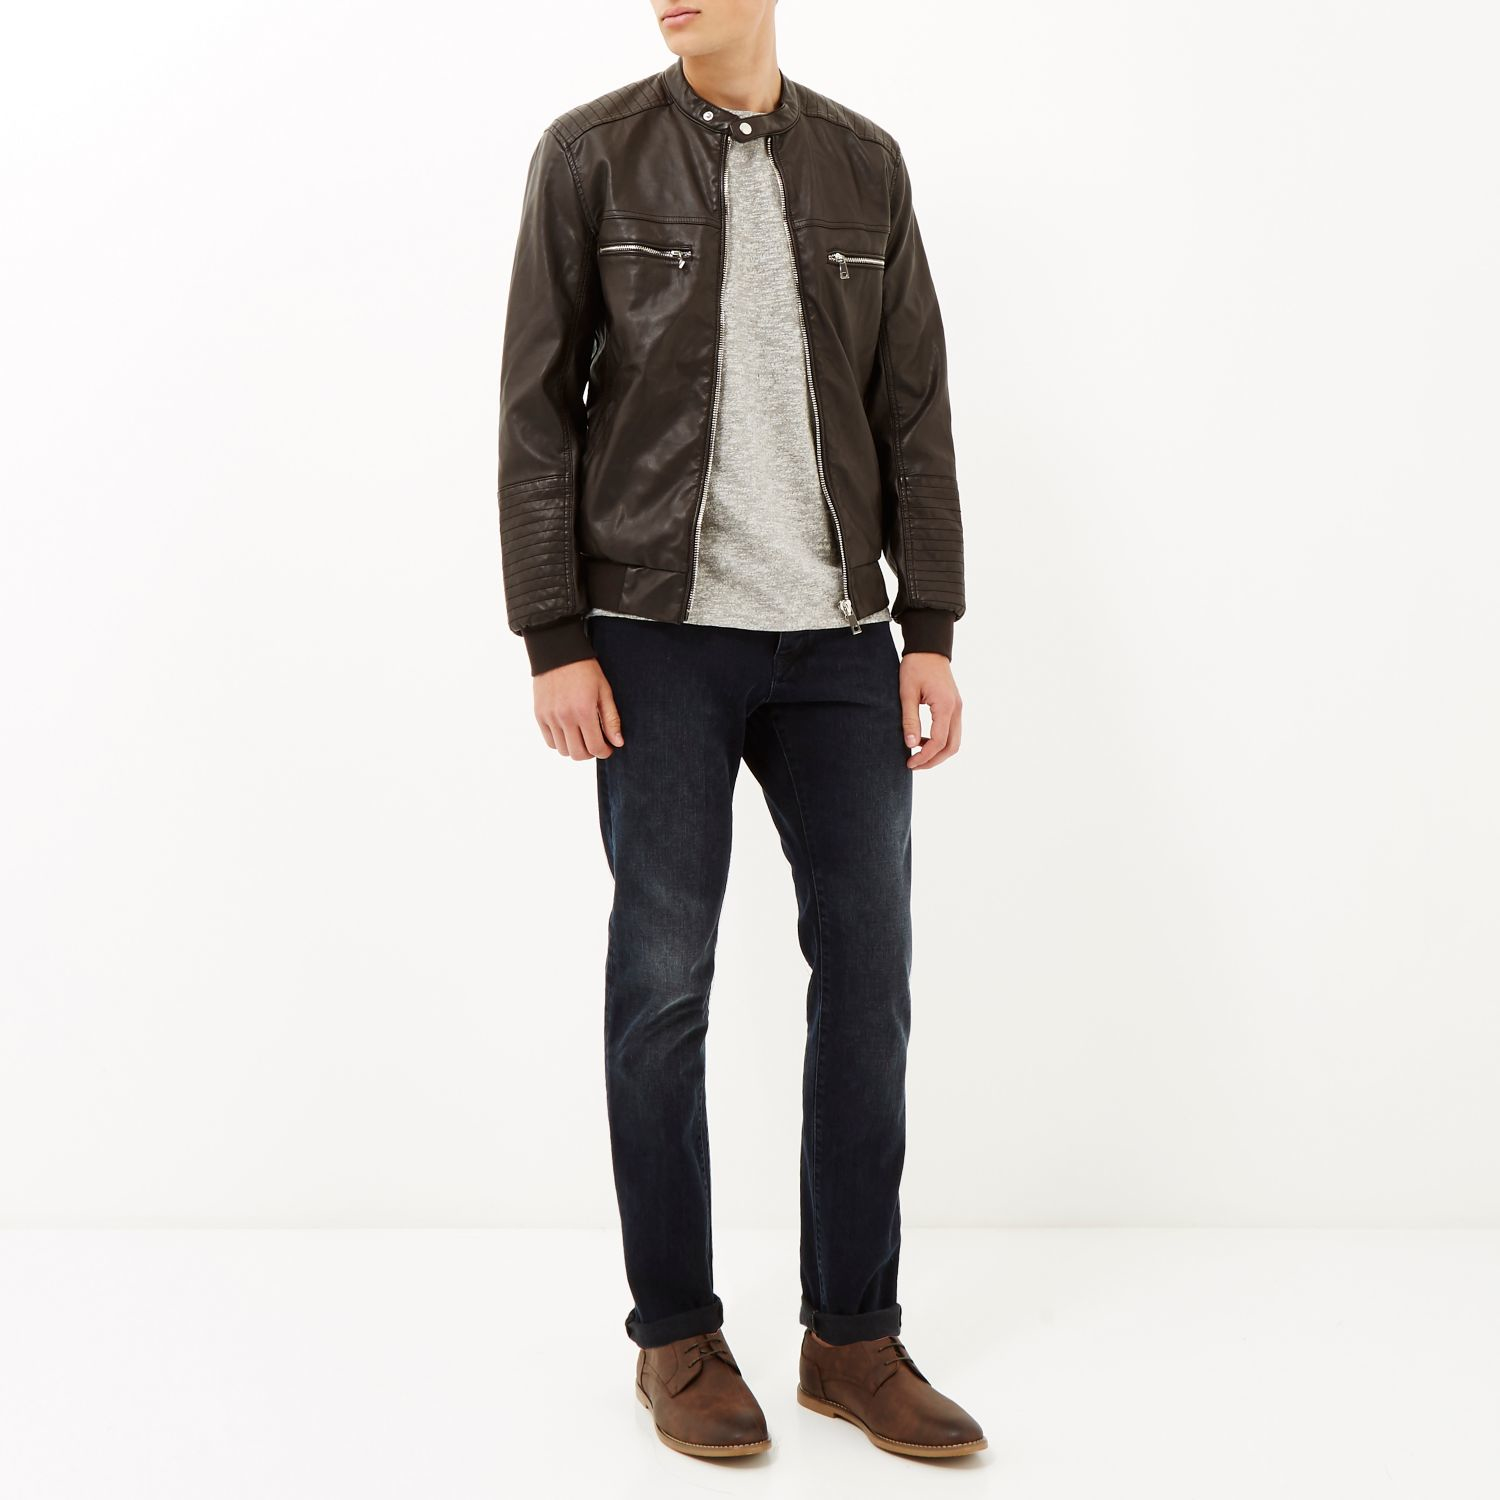 River island Dark Brown Leather-look Bomber Jacket in Brown for